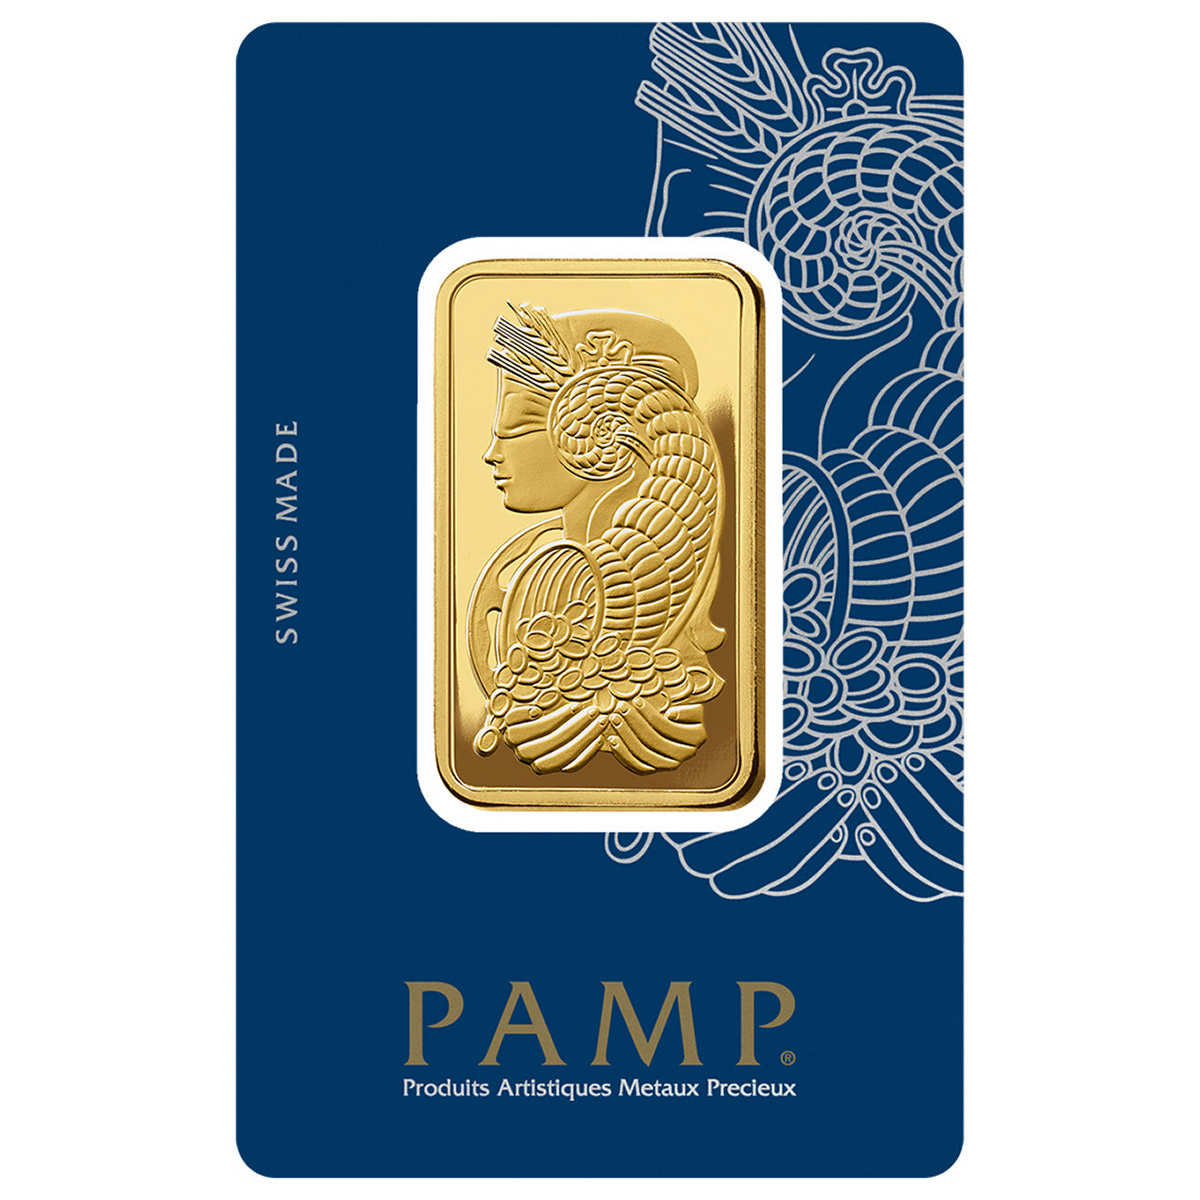 1 oz Gold Bar PAMP Suisse Lady Fortuna Veriscan (New In Assay) Costco )2229.99 $2229.99